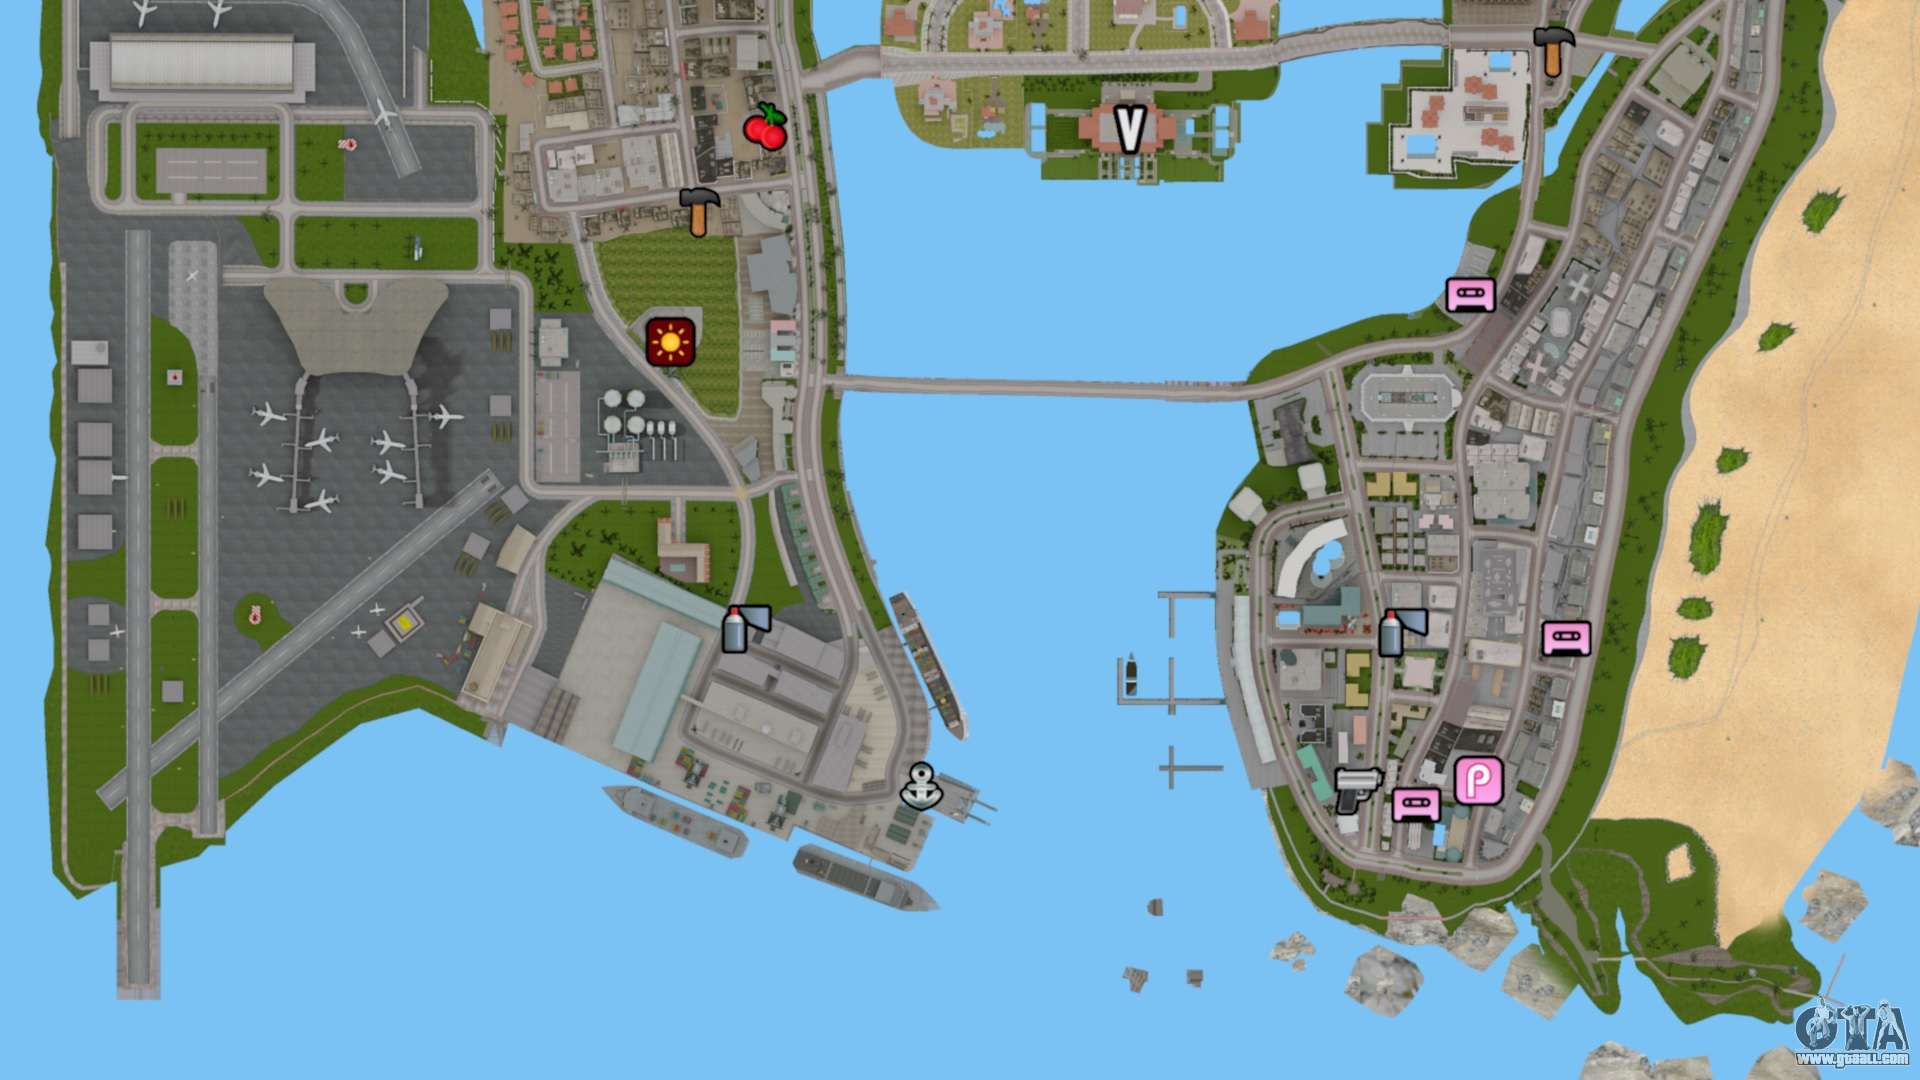 HD Satellite Map For ViceCity v1 for GTA Vice City Definitive Edition